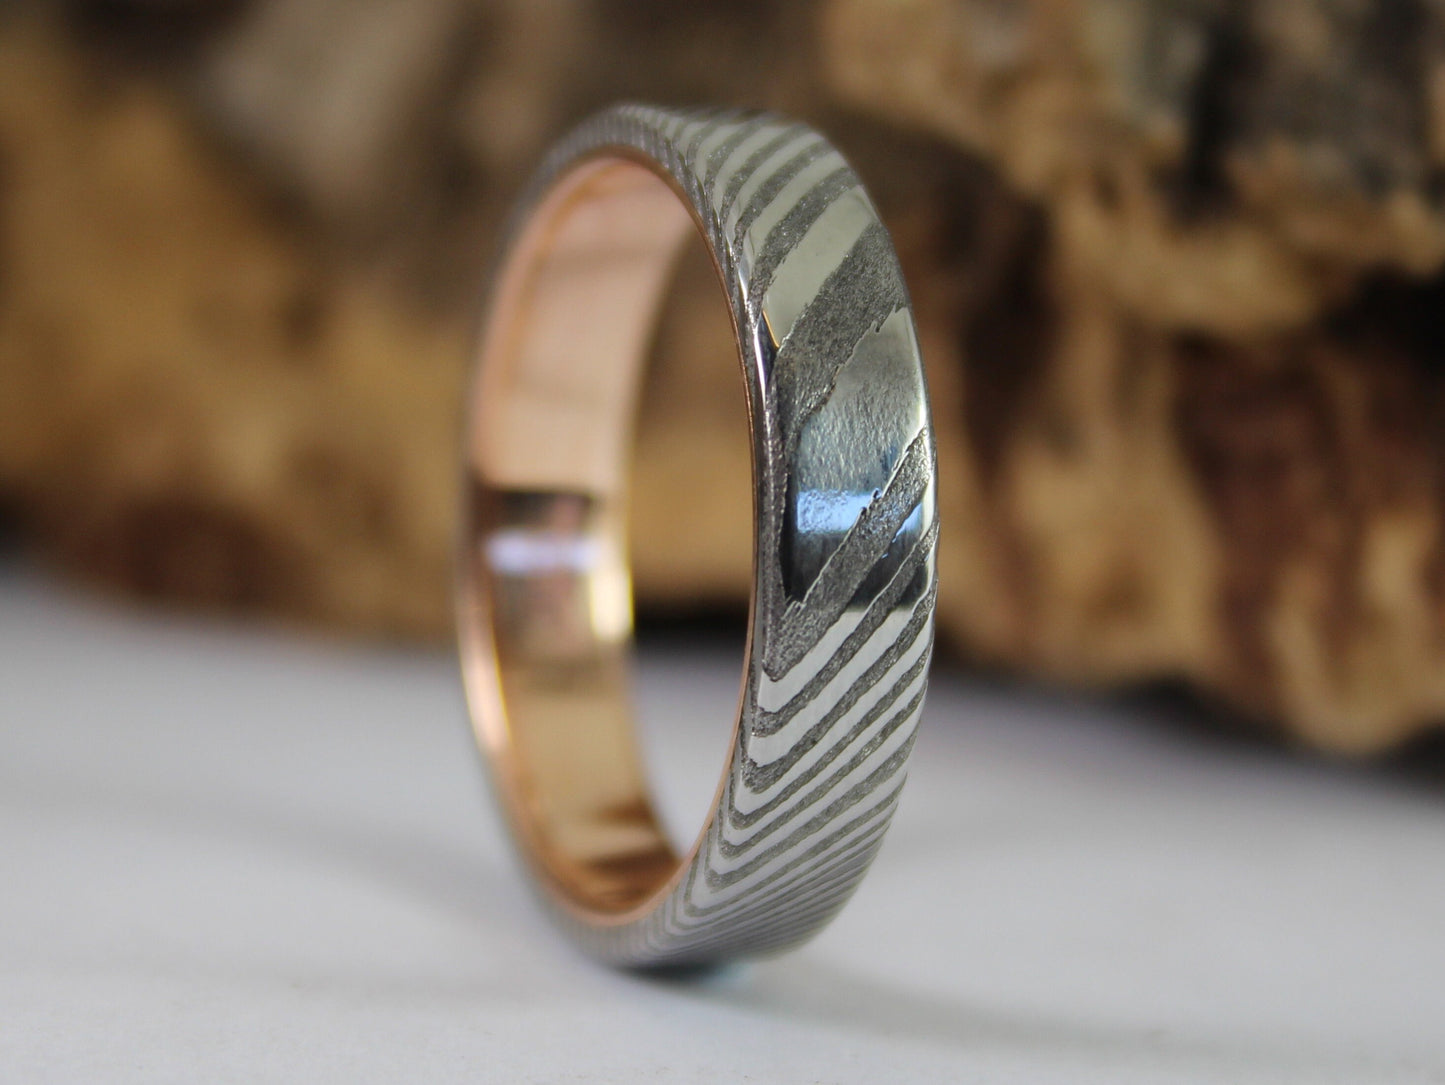 Wood Grain Damascus Steel Ring with 9ct Rose Gold Inside